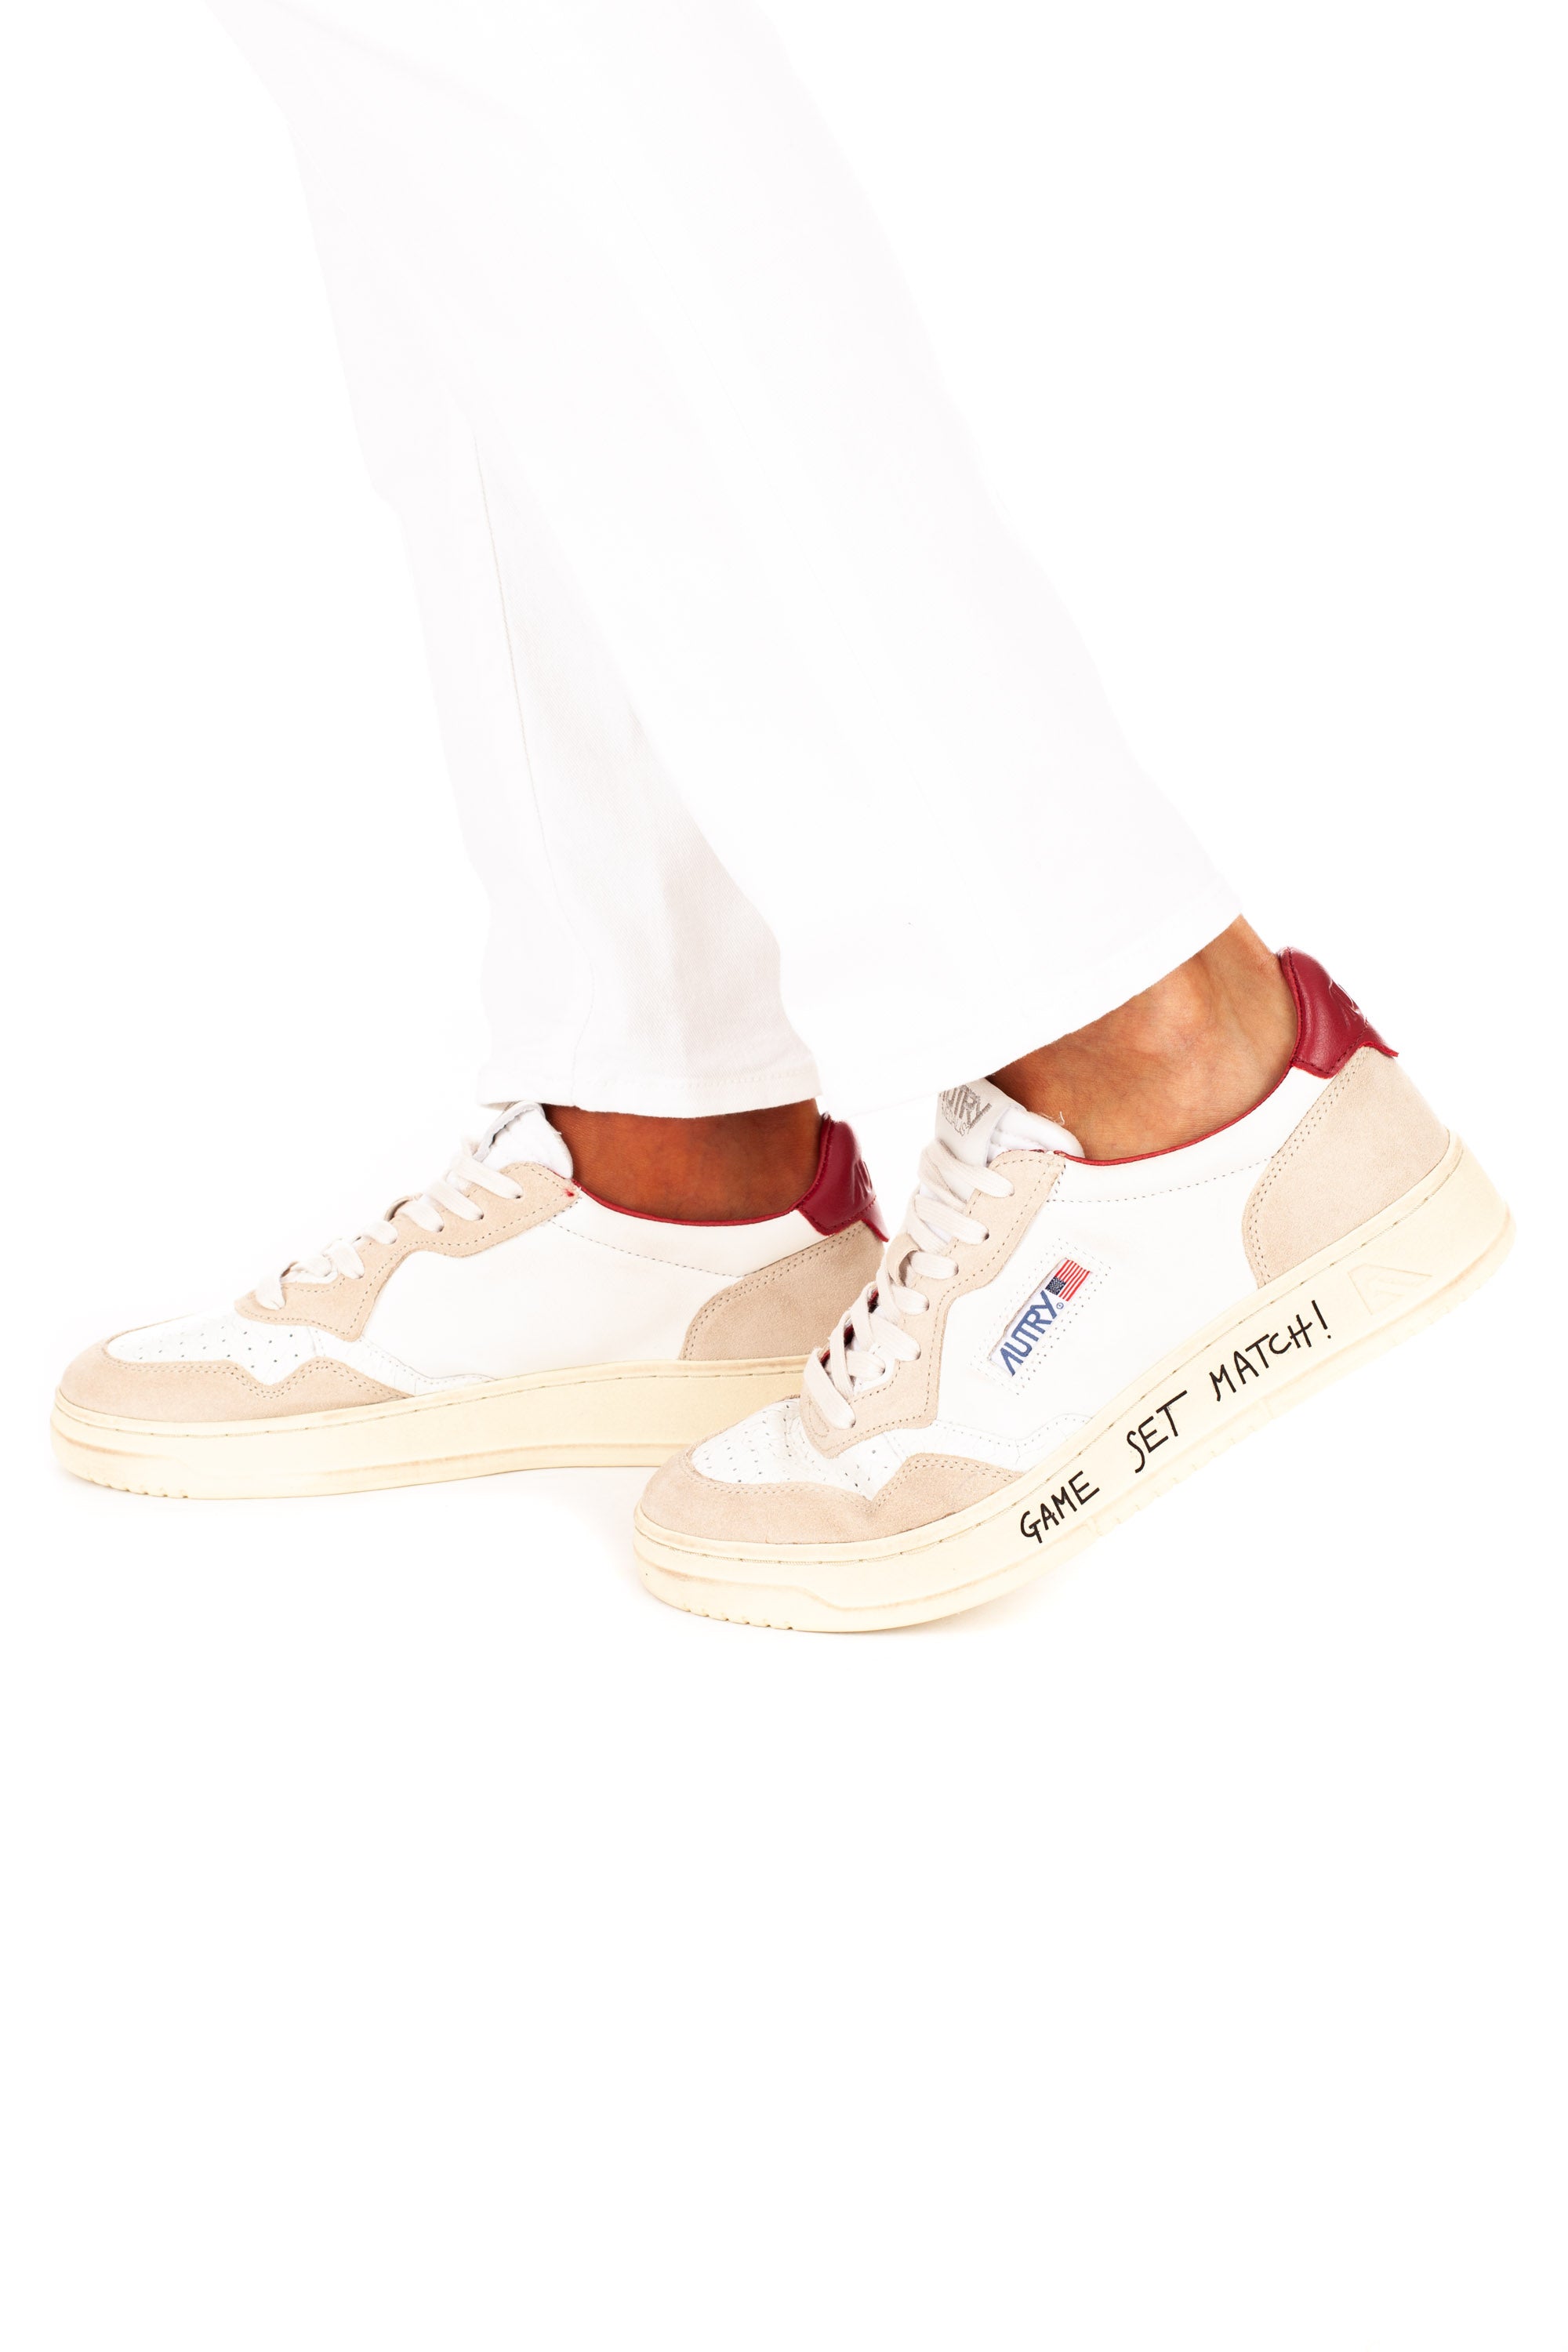 Medalist sneaker with red heel tab and writing